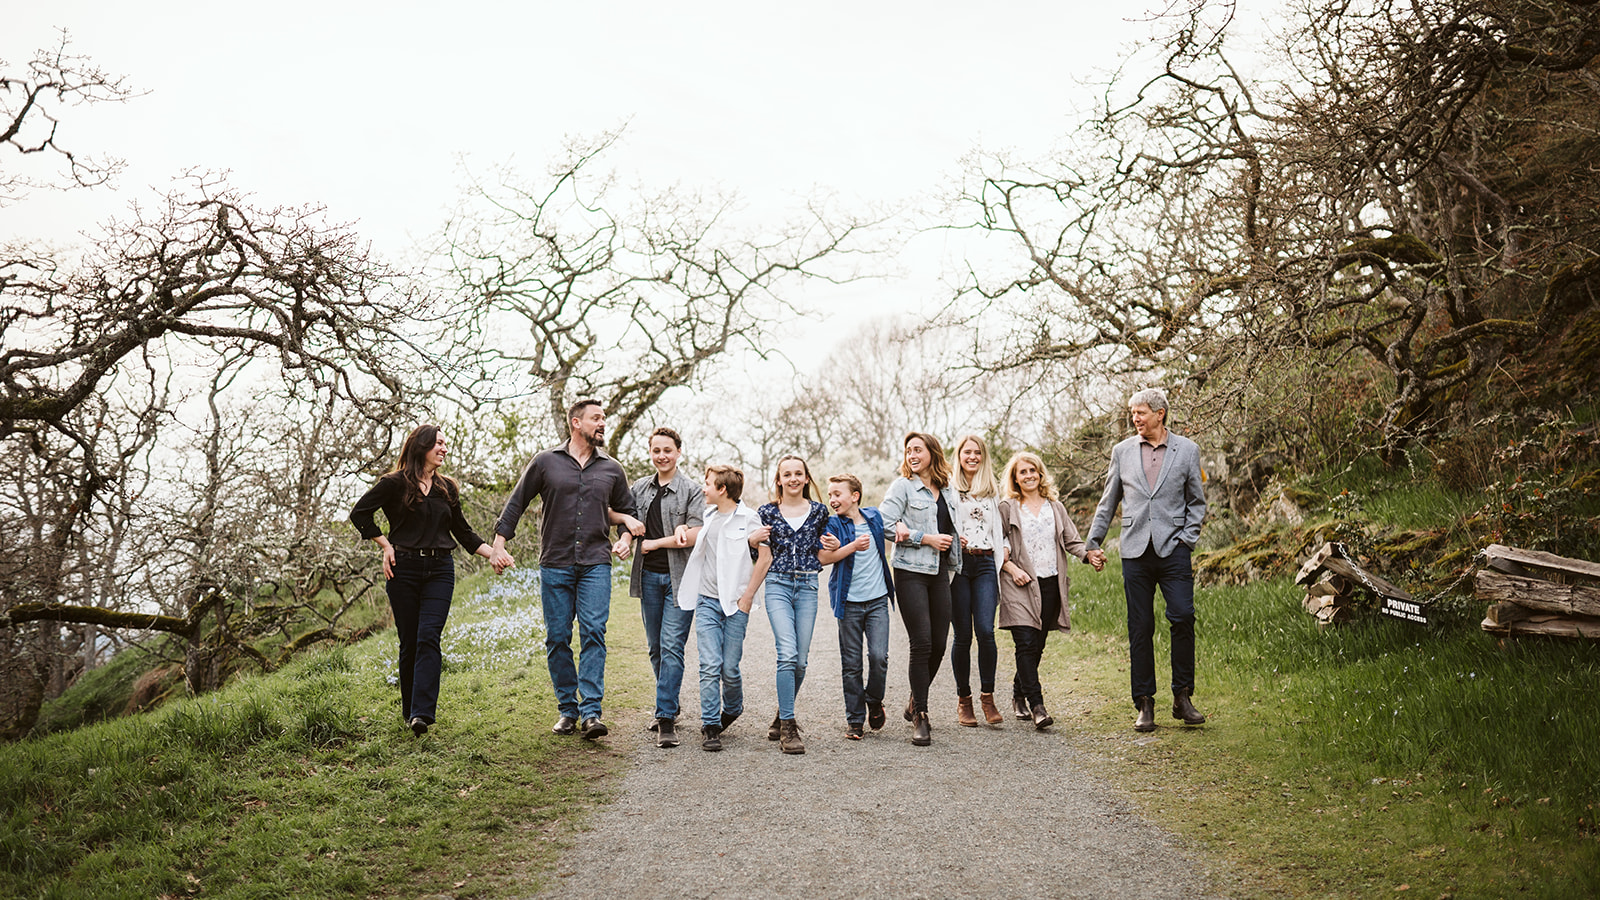 Large family group walking arm in arm and laughing